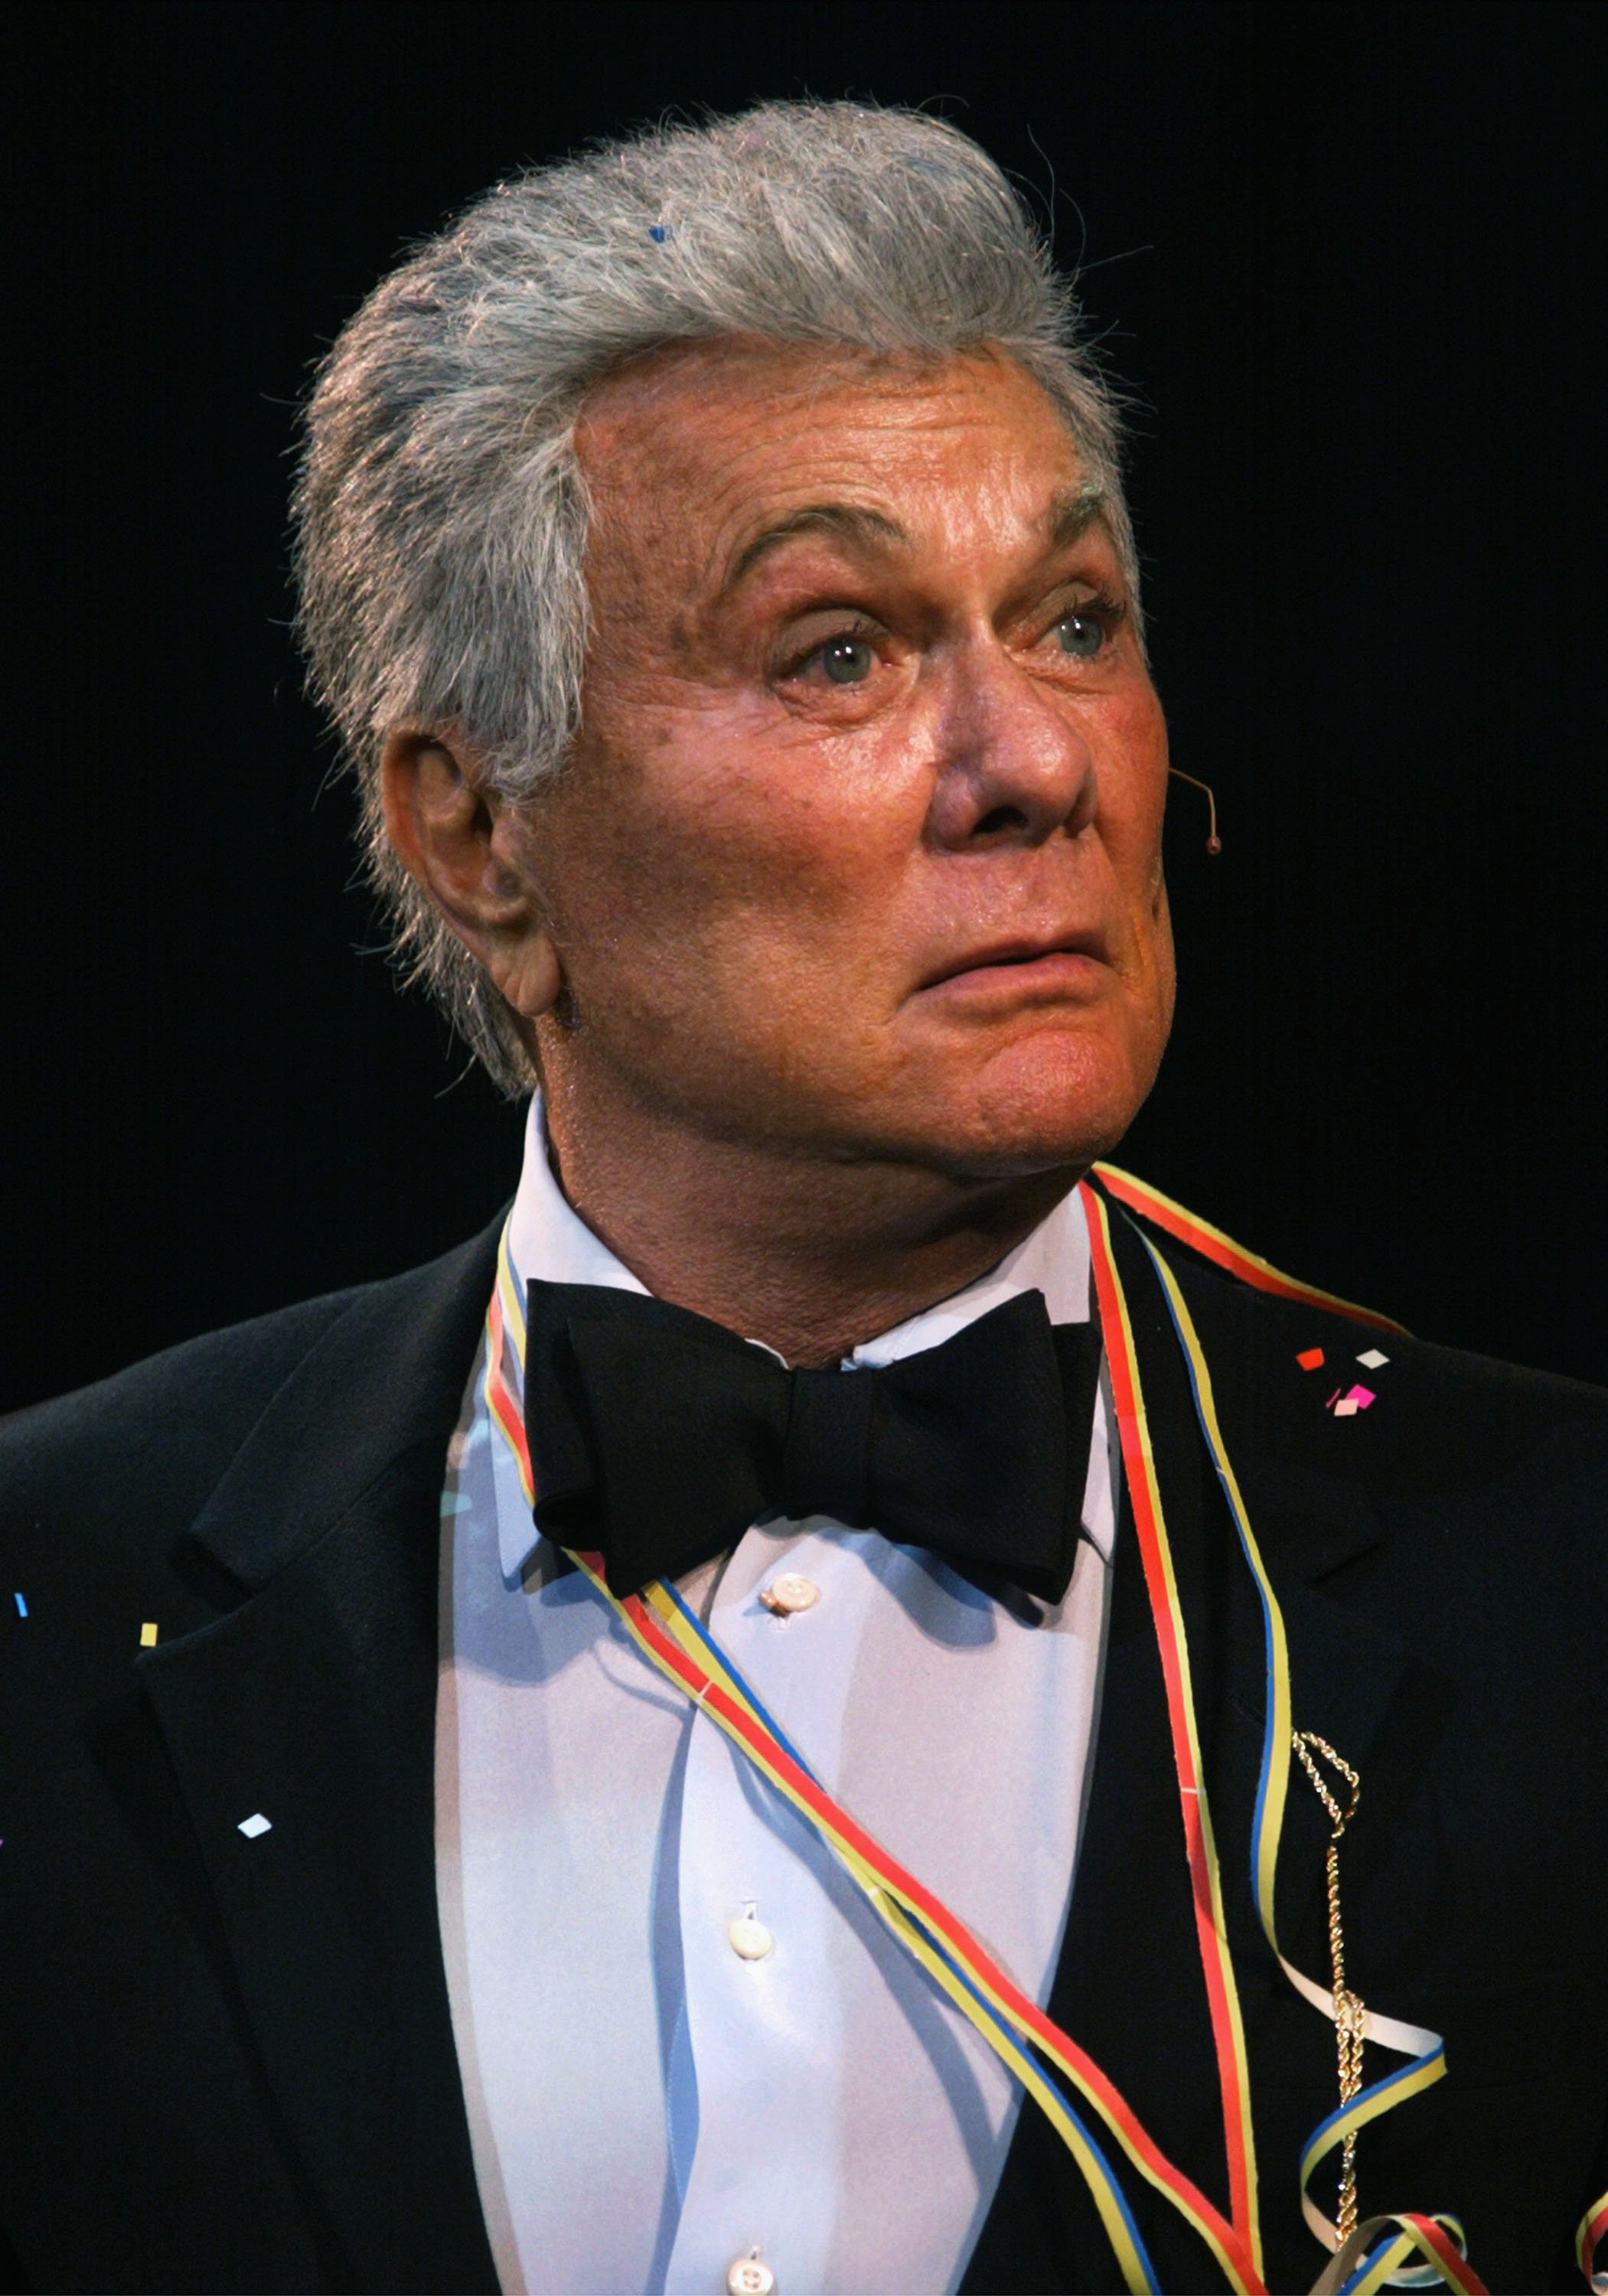 Tony Curtis in the musical "Some Like it Hot" at Wolf Trap, August 27, 2002, in Vienna, Virginia. | Source: Getty Images